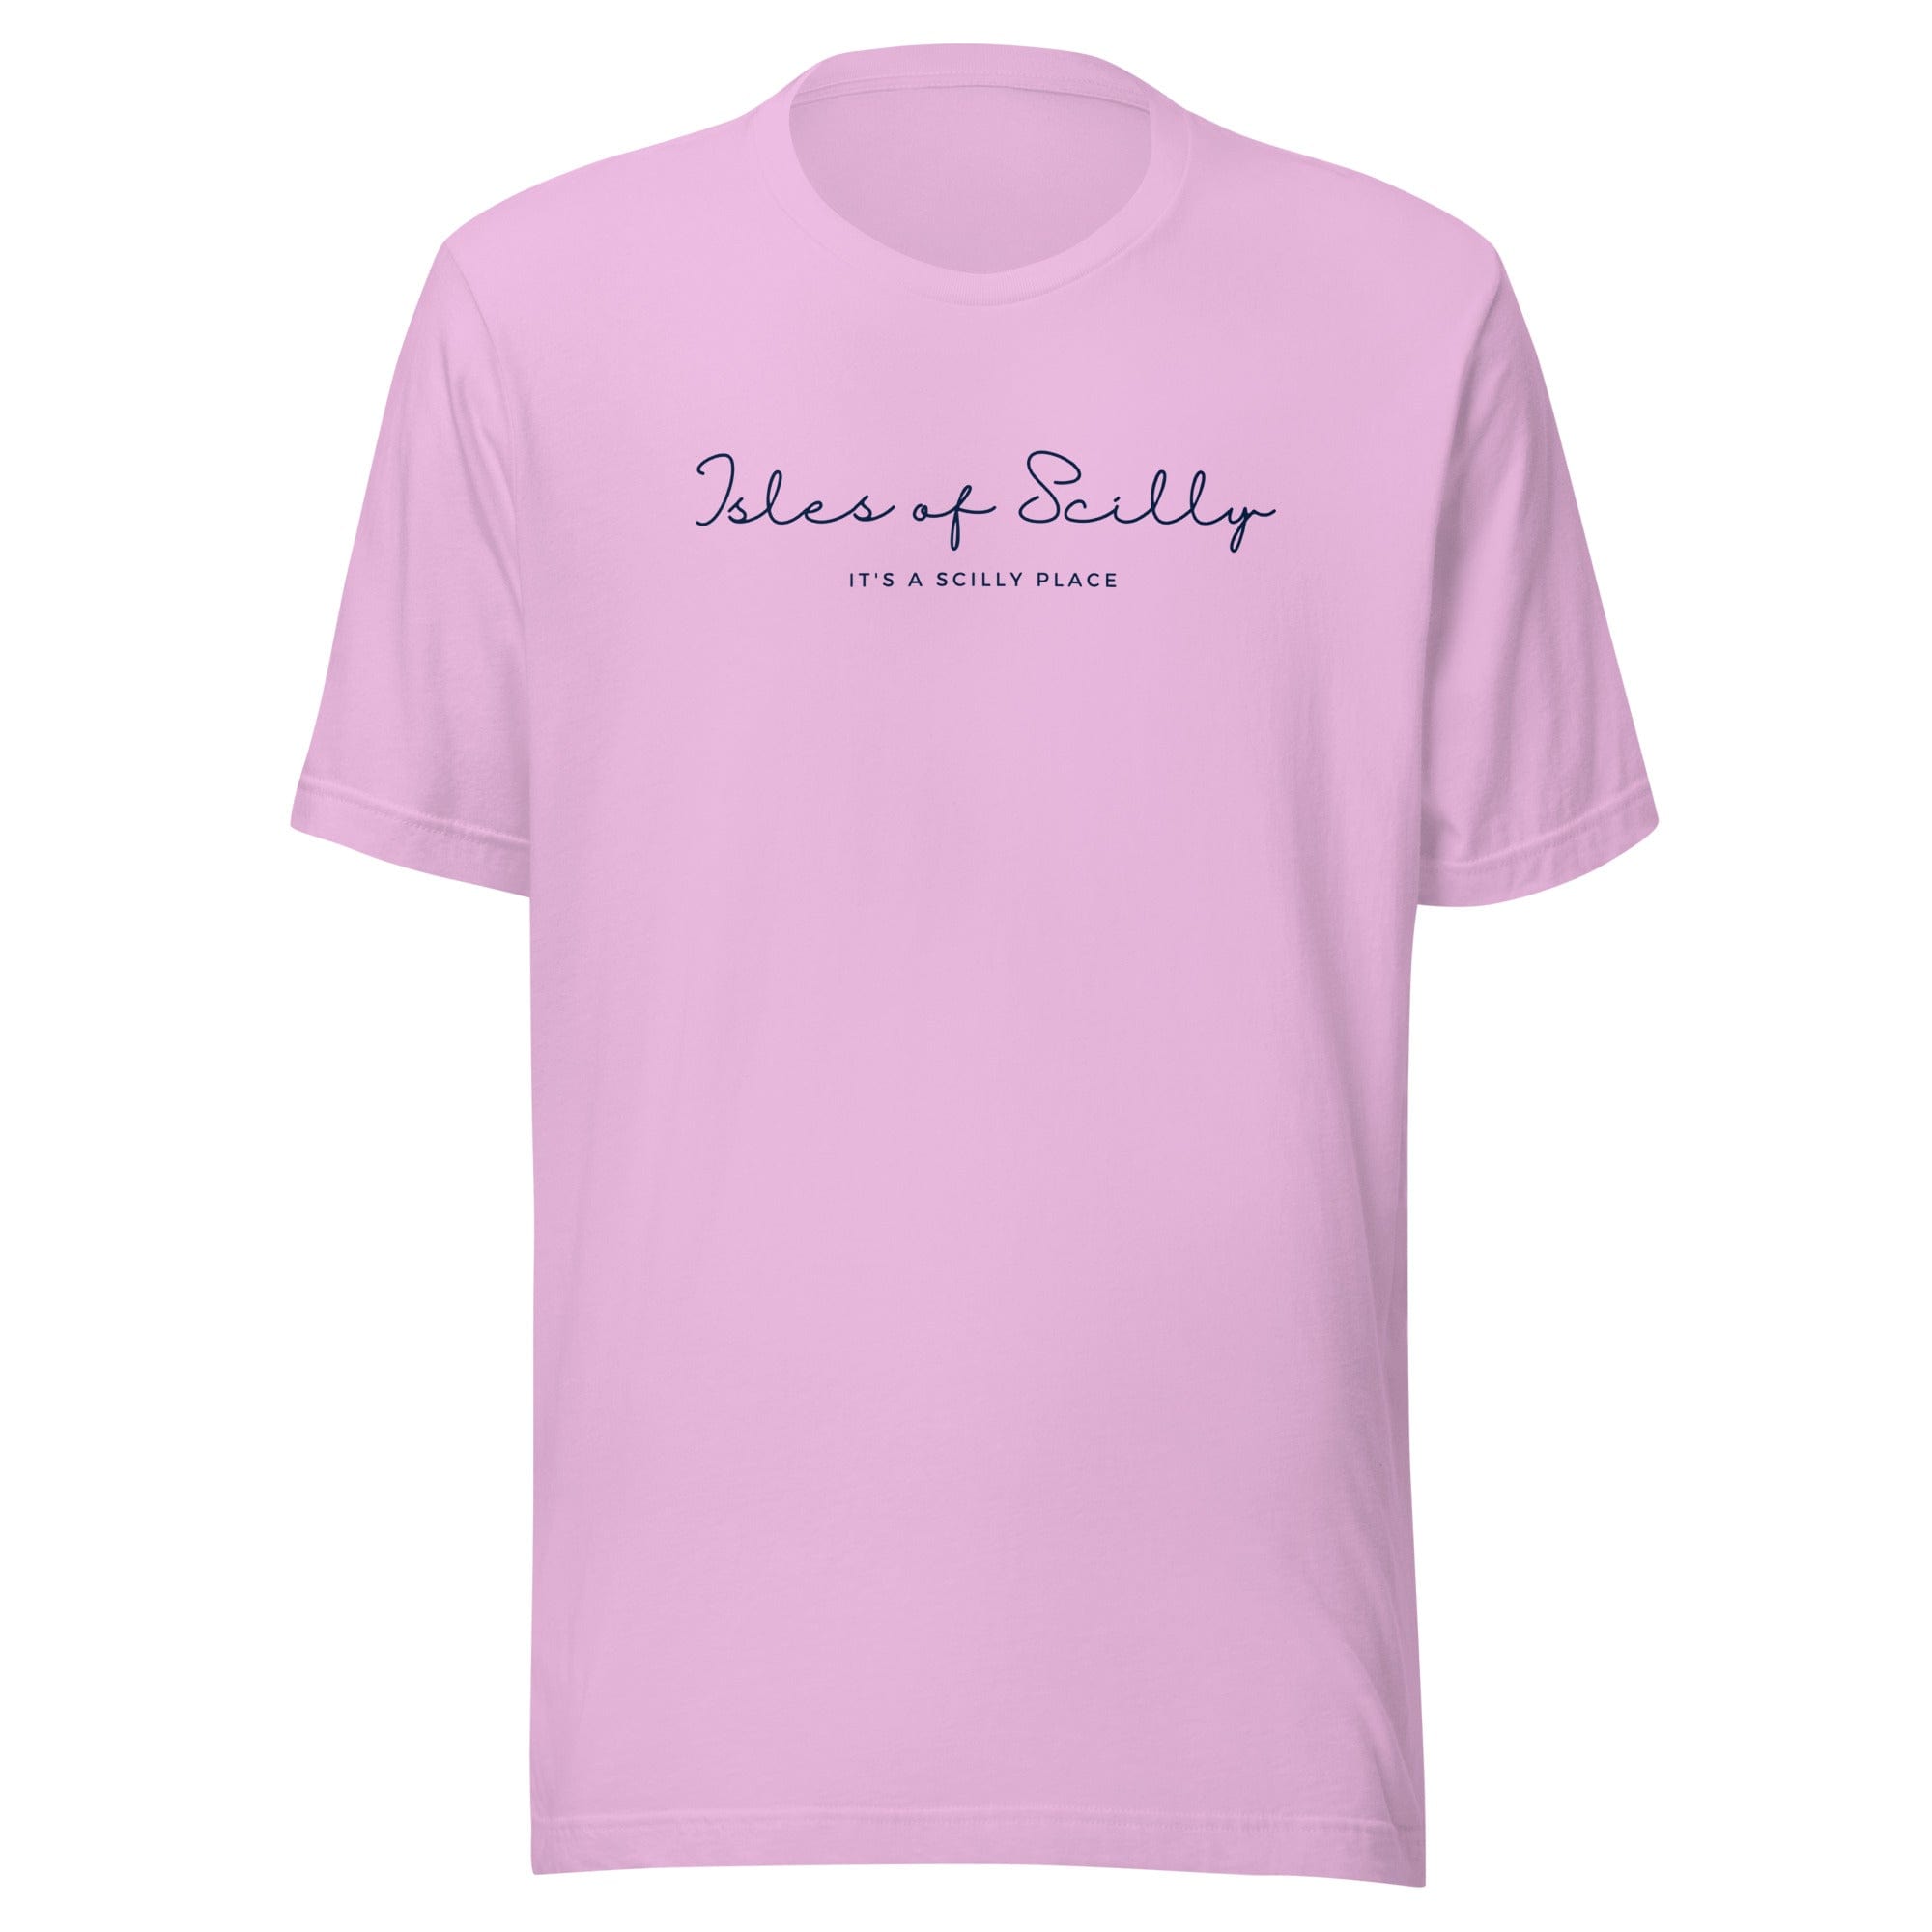 Isles of Scilly, It's a Scilly Place T-shirt Lilac / S Shirts & Tops Jolly & Goode